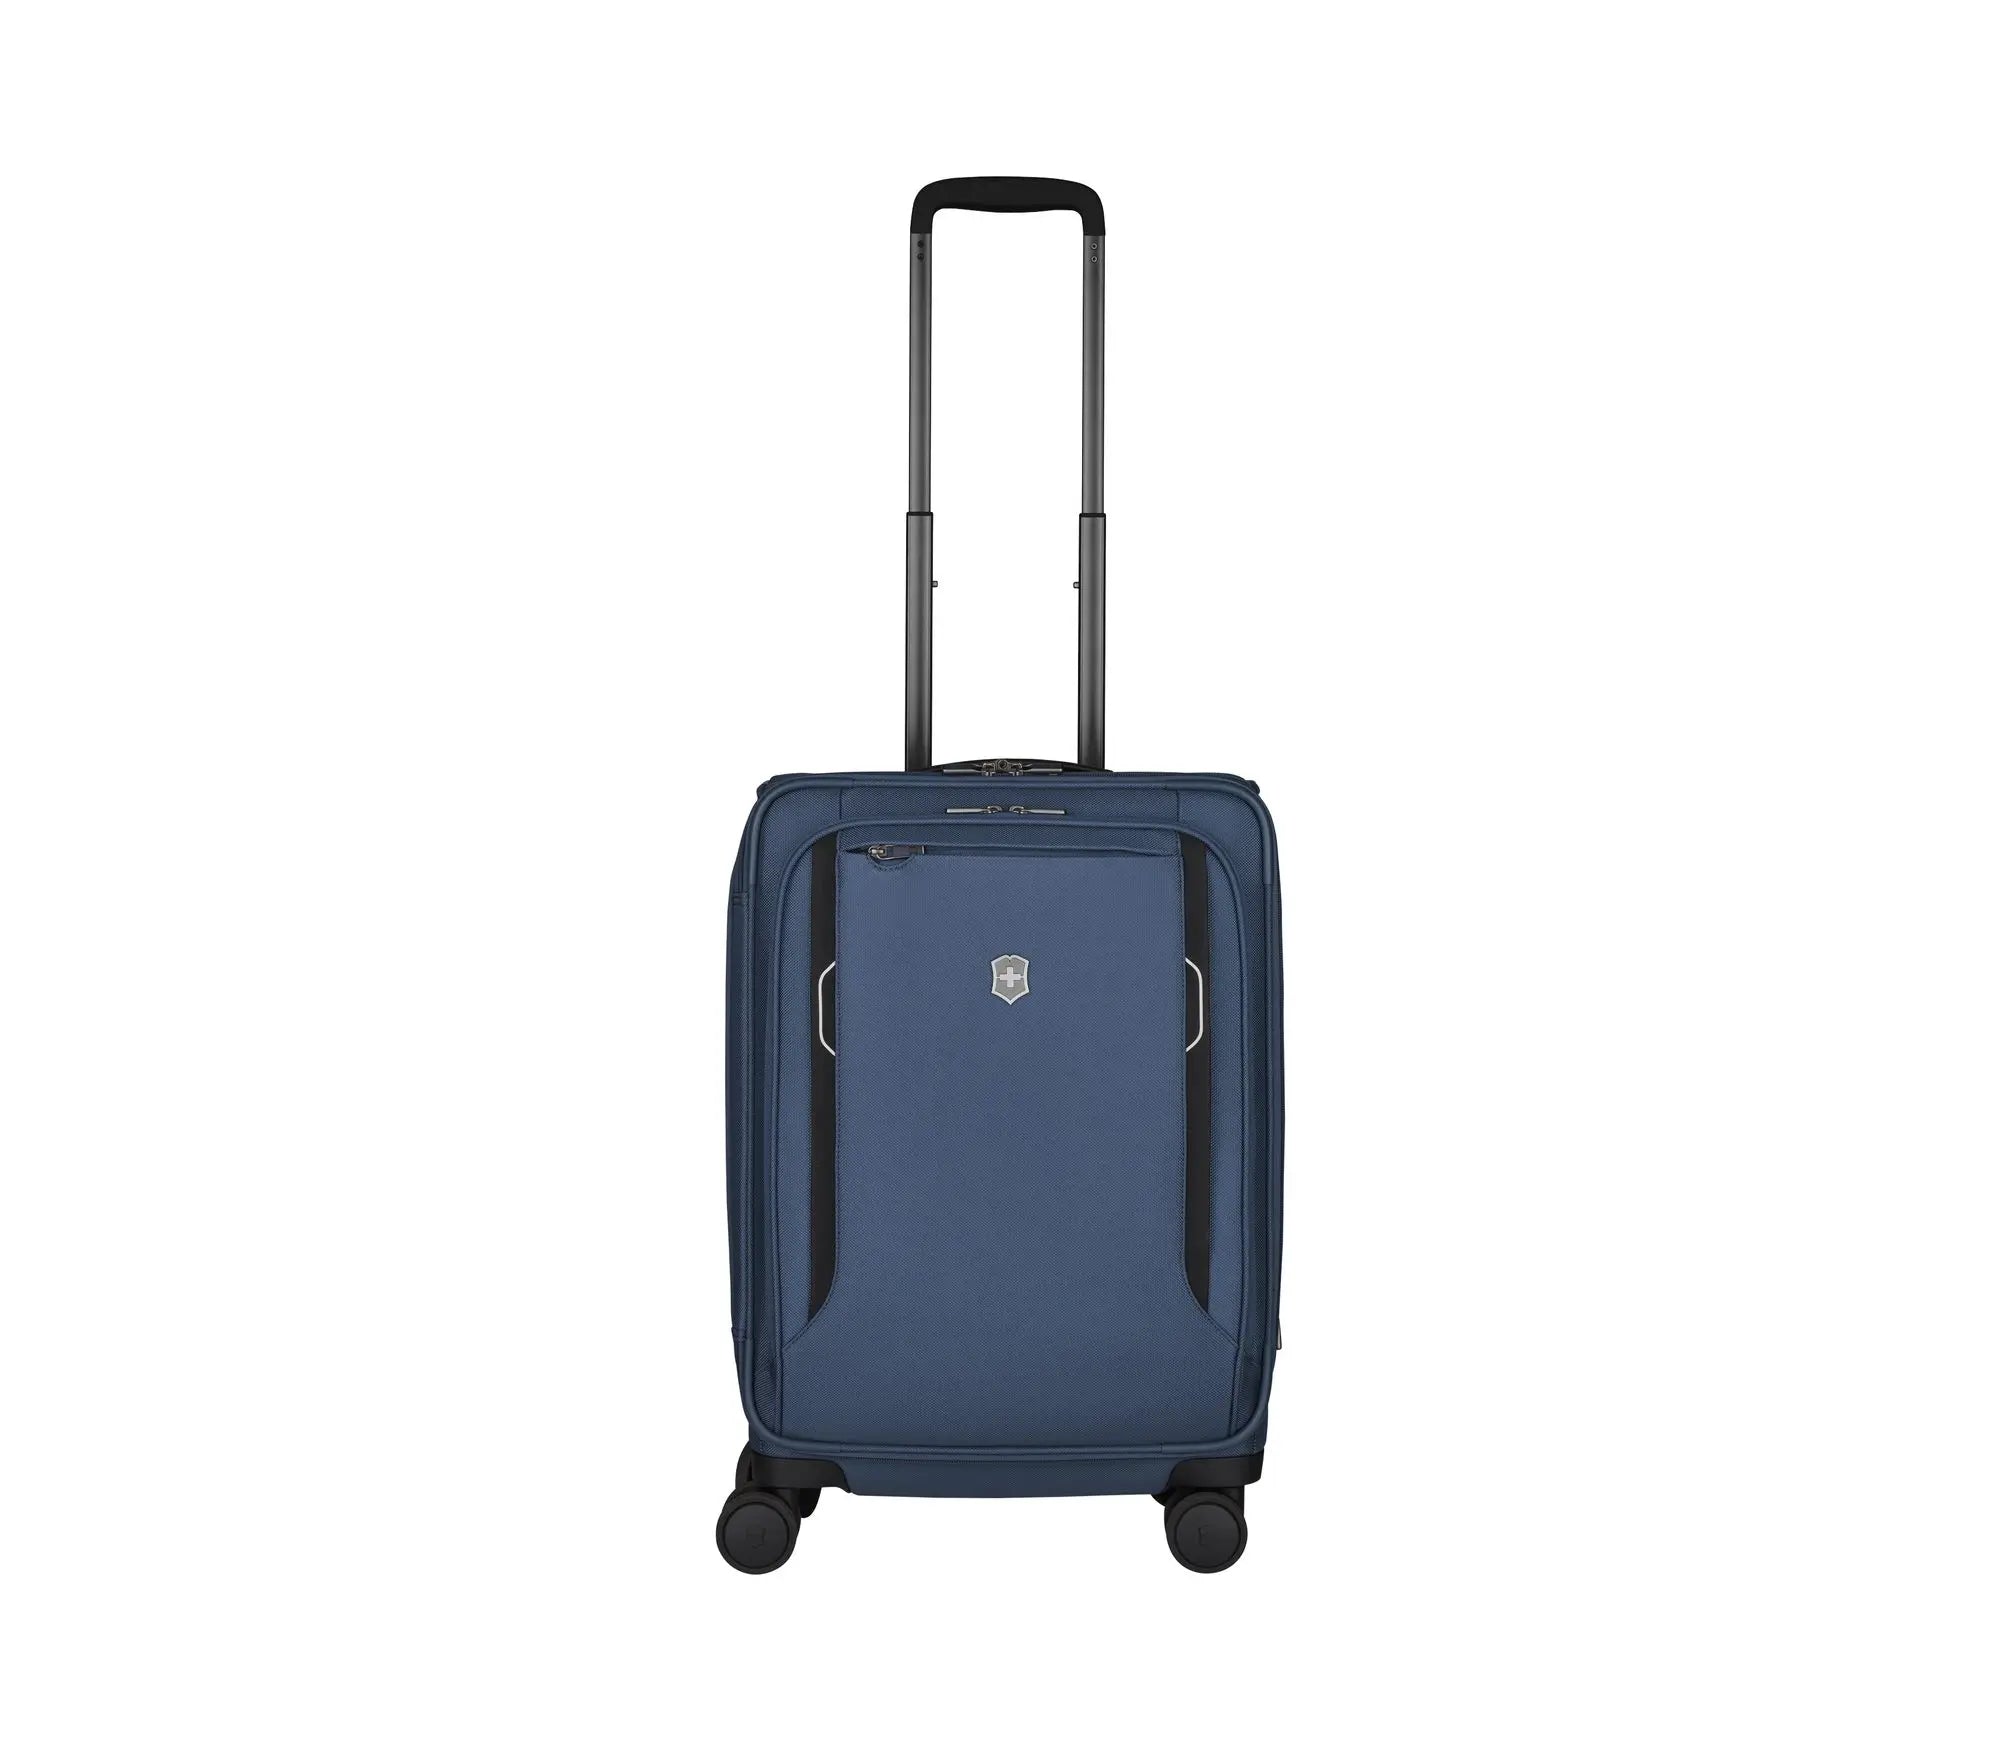 Werks Traveler 6.0 Frequent Flyer Plus Softside Carry-On 23" - Voyage Luggage